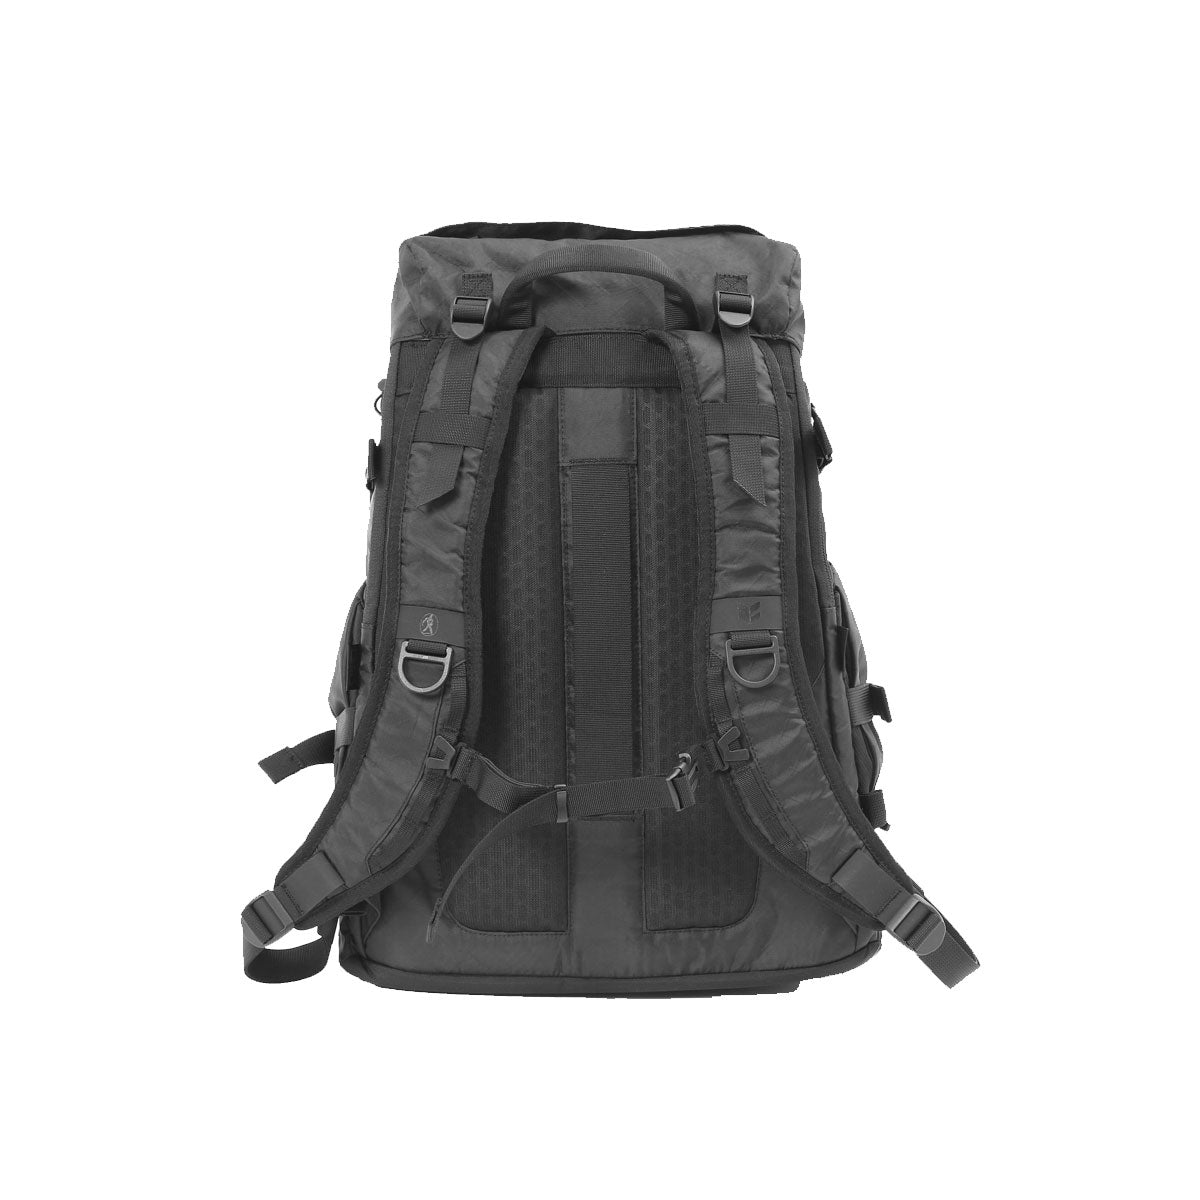 [PO] Code of Bell : Double Name Project II - 4020X Backpack (Limited Edition)